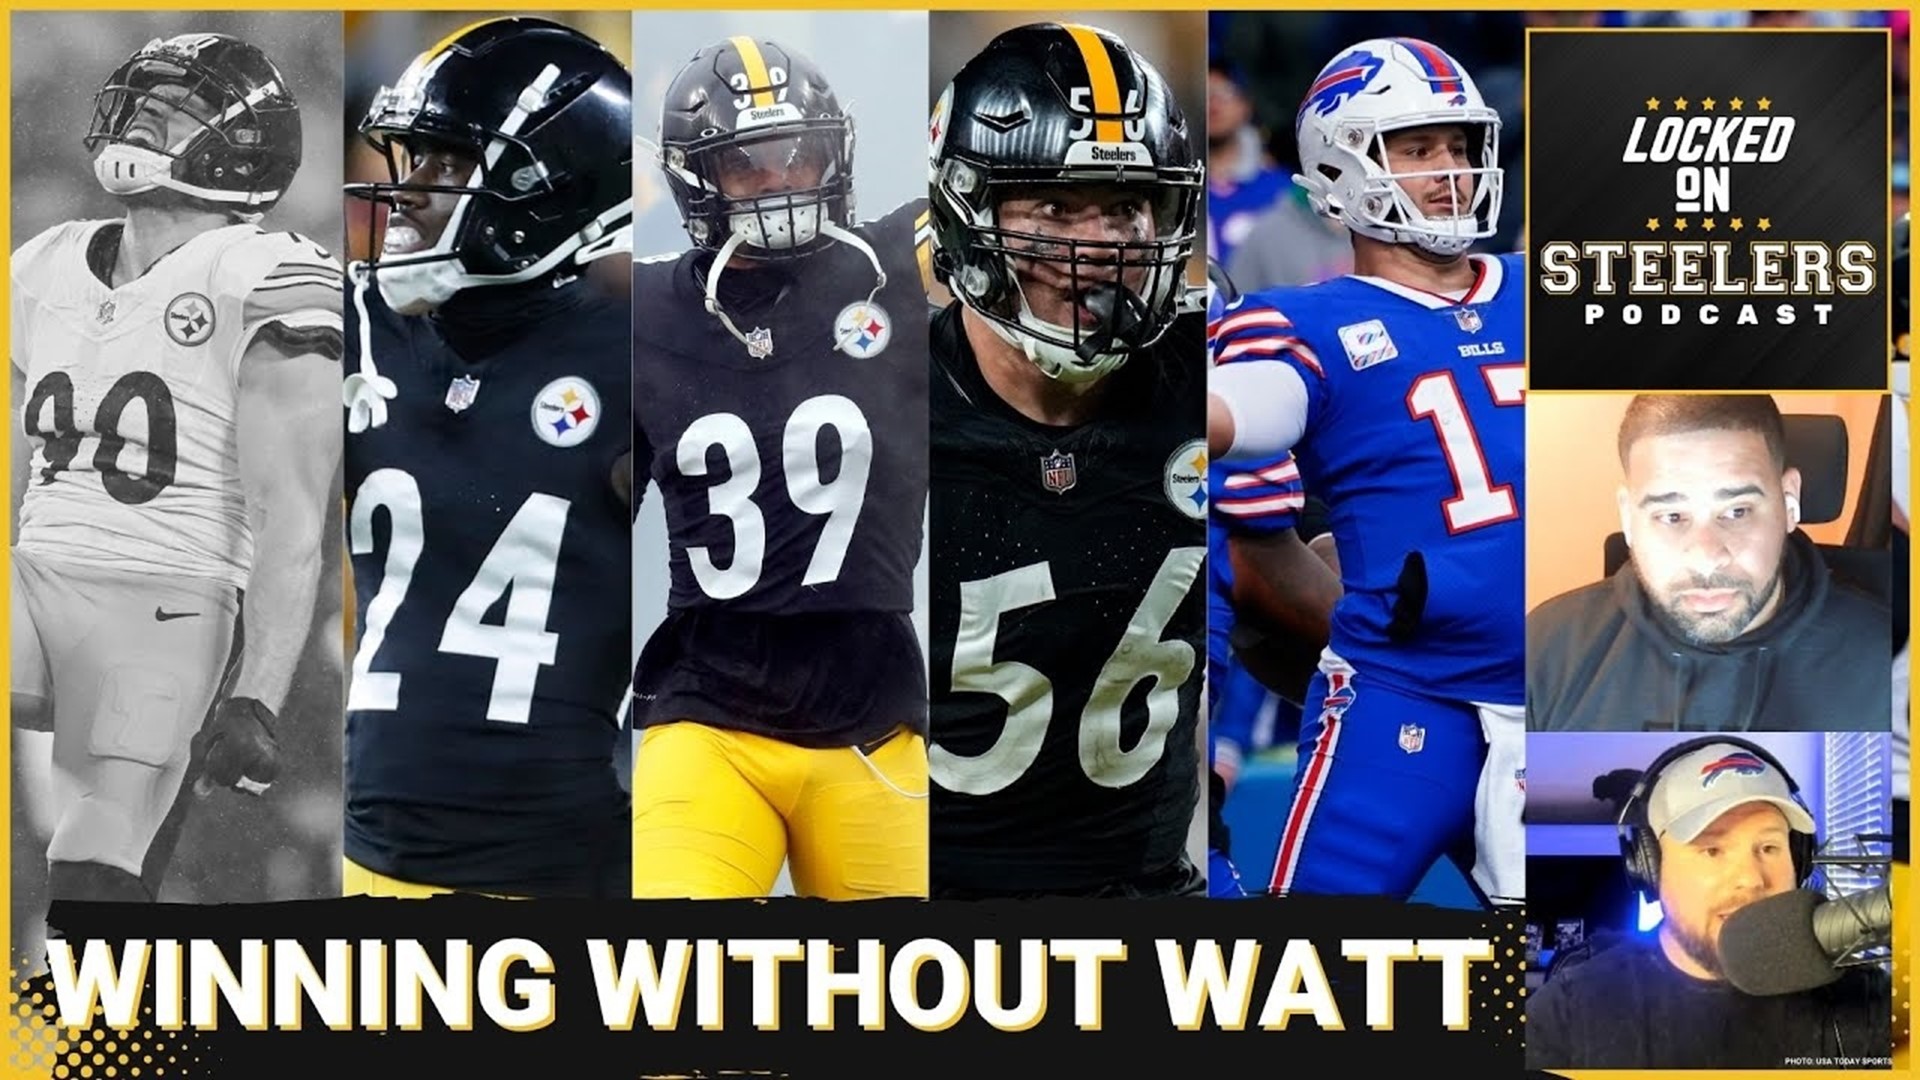 The Pittsburgh Steelers will be without T.J. Watt in their playoff matchup with the Buffalo Bills.